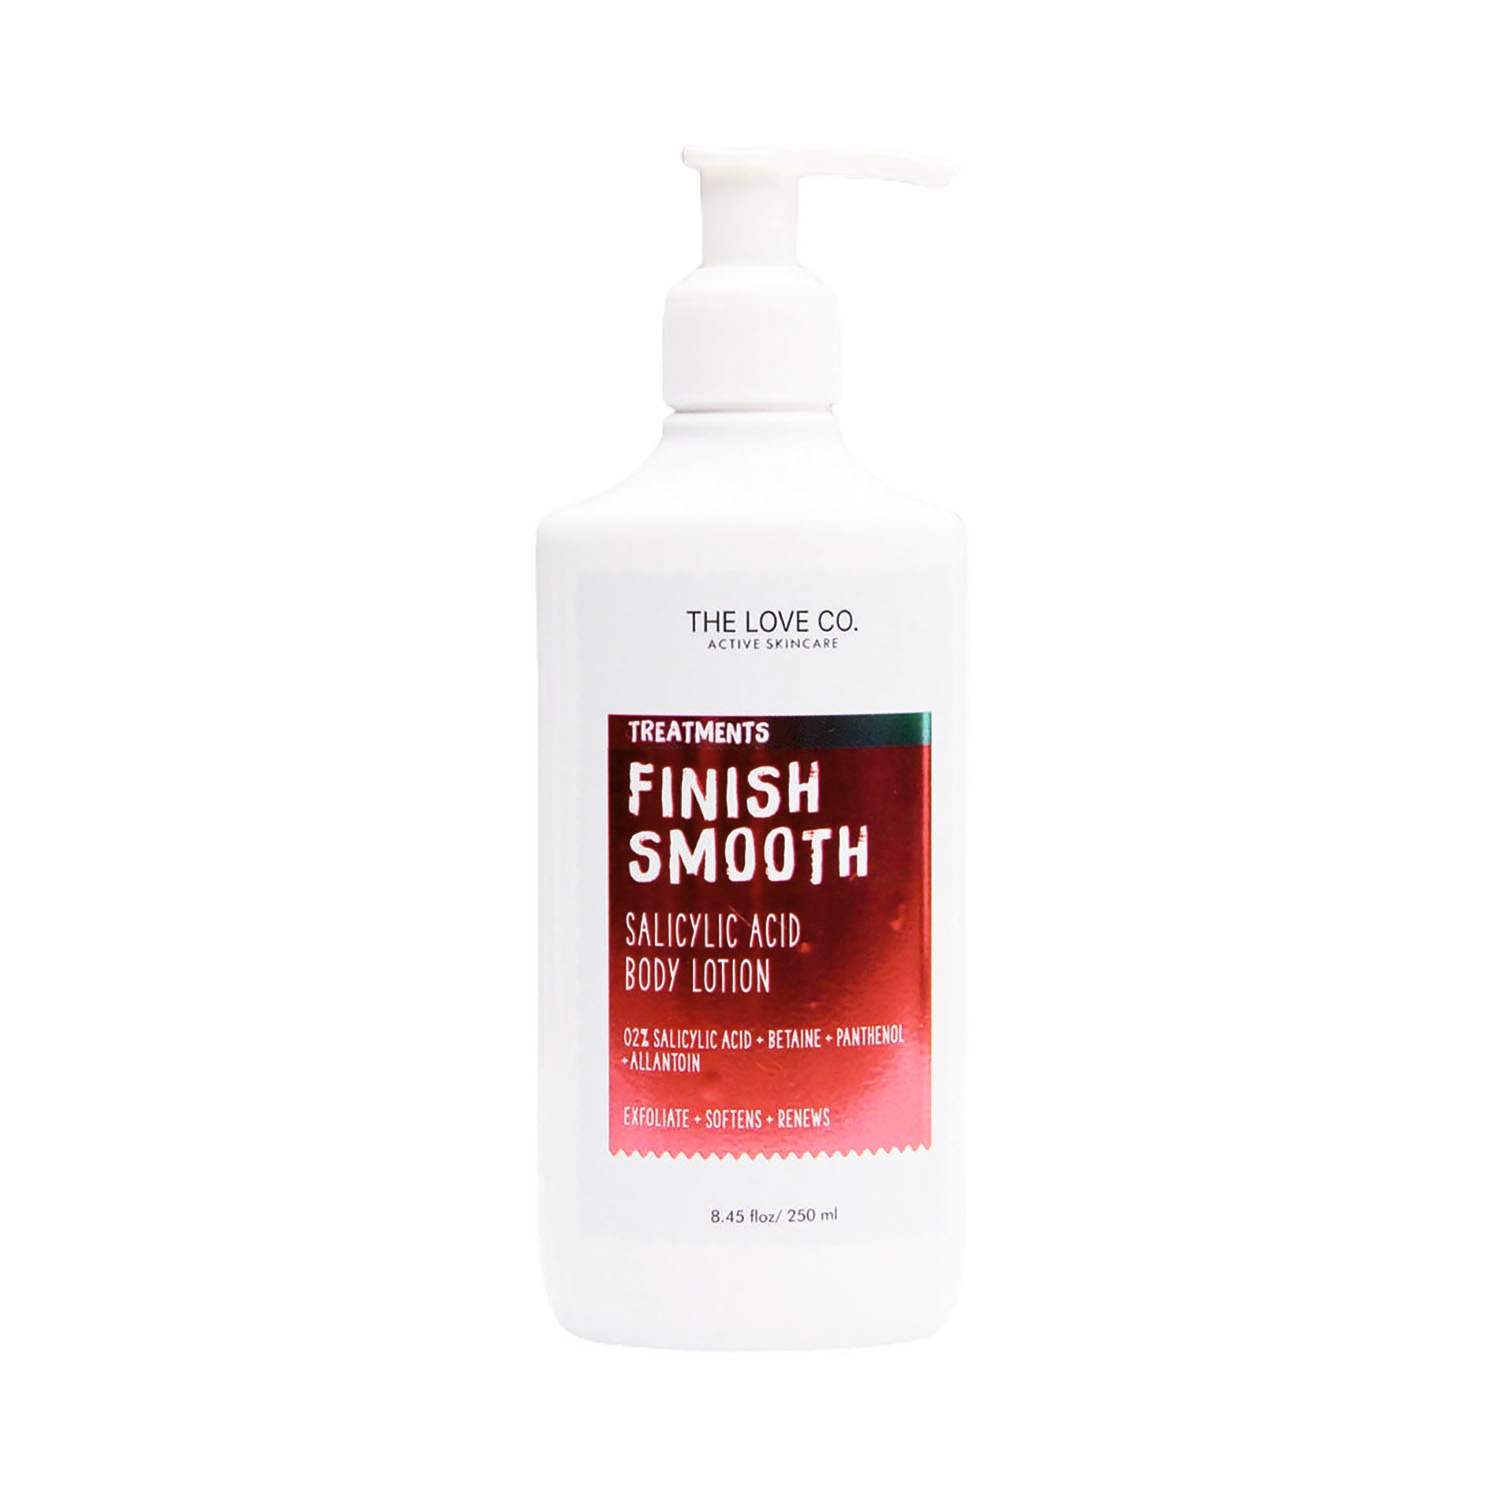 THE LOVE CO. | THE LOVE CO. Finish Smooth Body Lotion With 2% Salicylic Acid For Rough & Bumpy Skin (250ml)